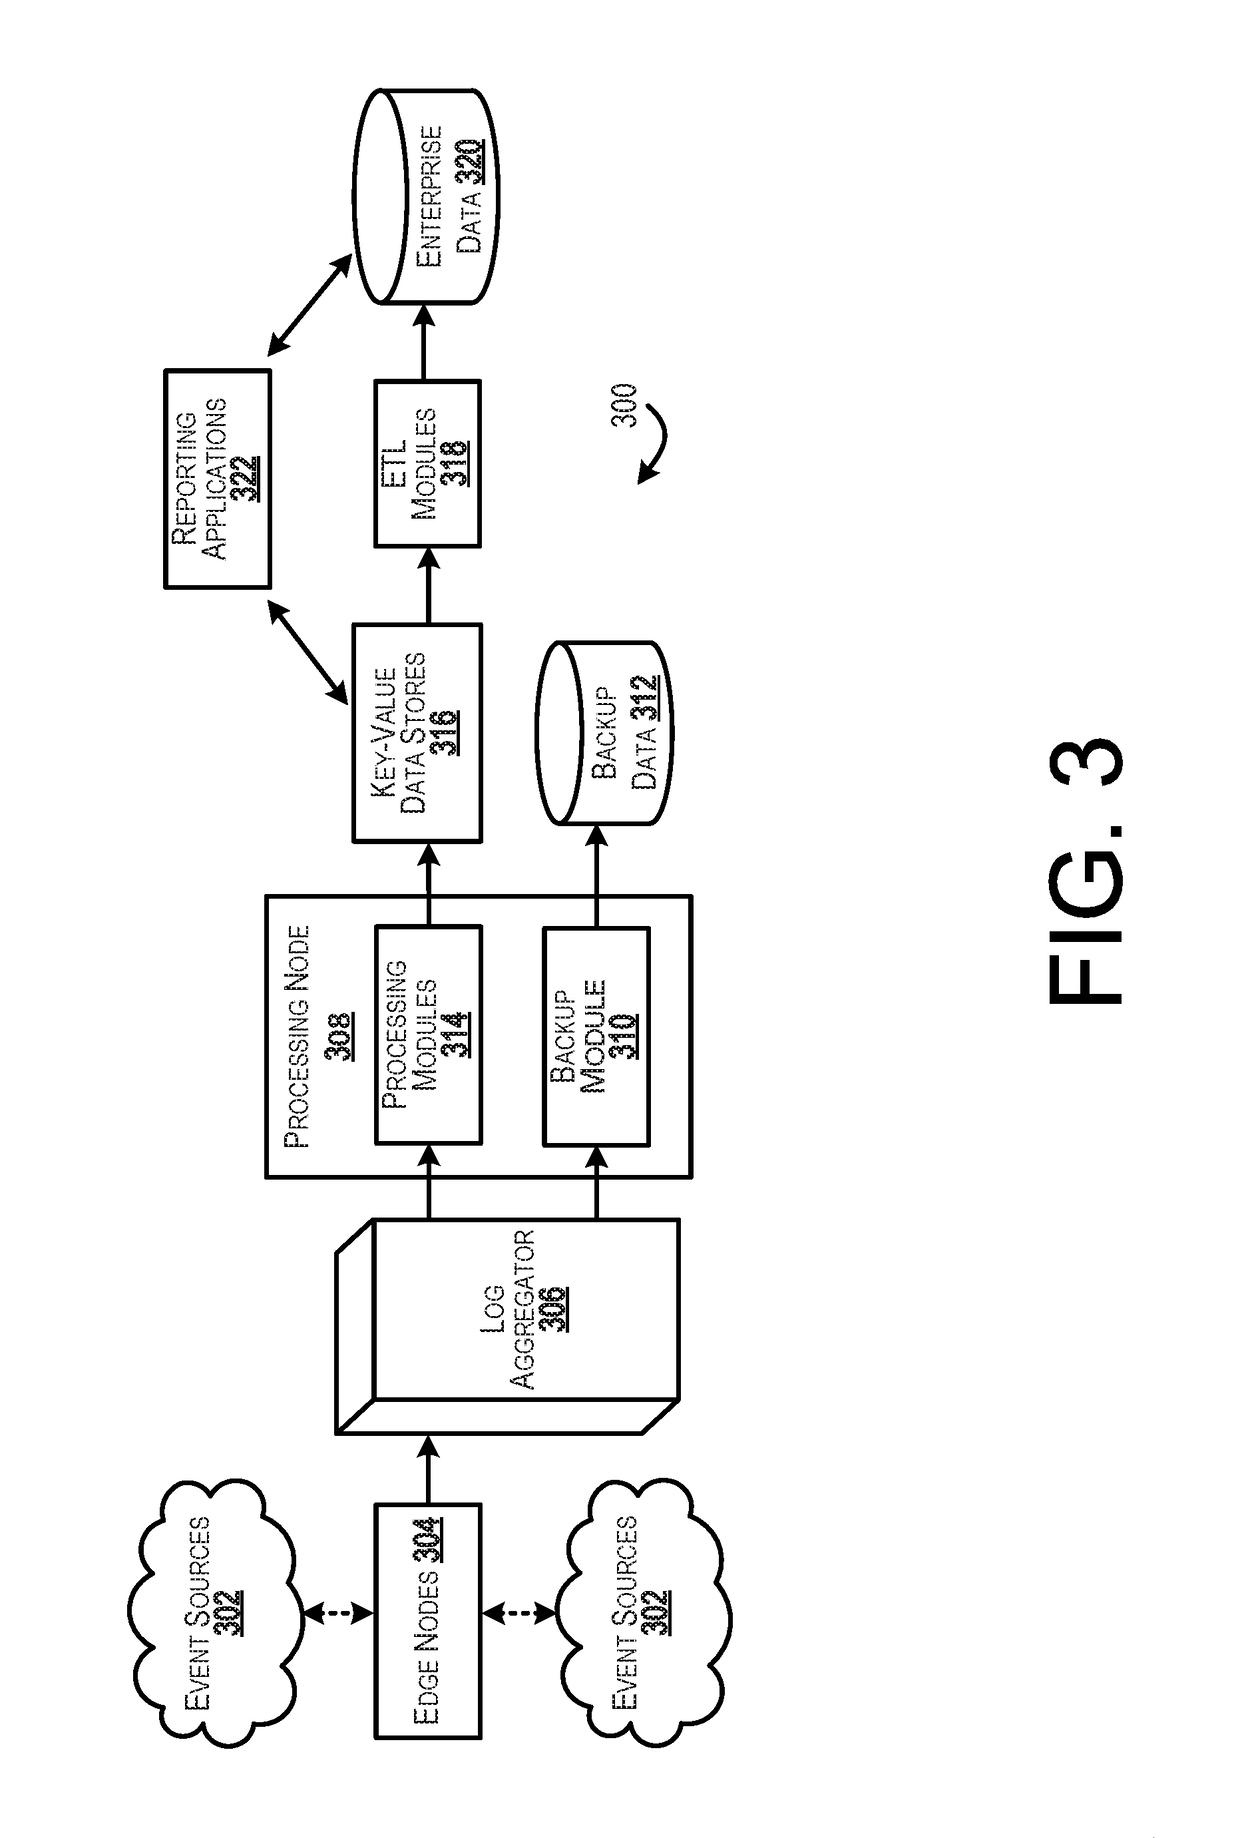 Real-time fault-tolerant architecture for large-scale event processing